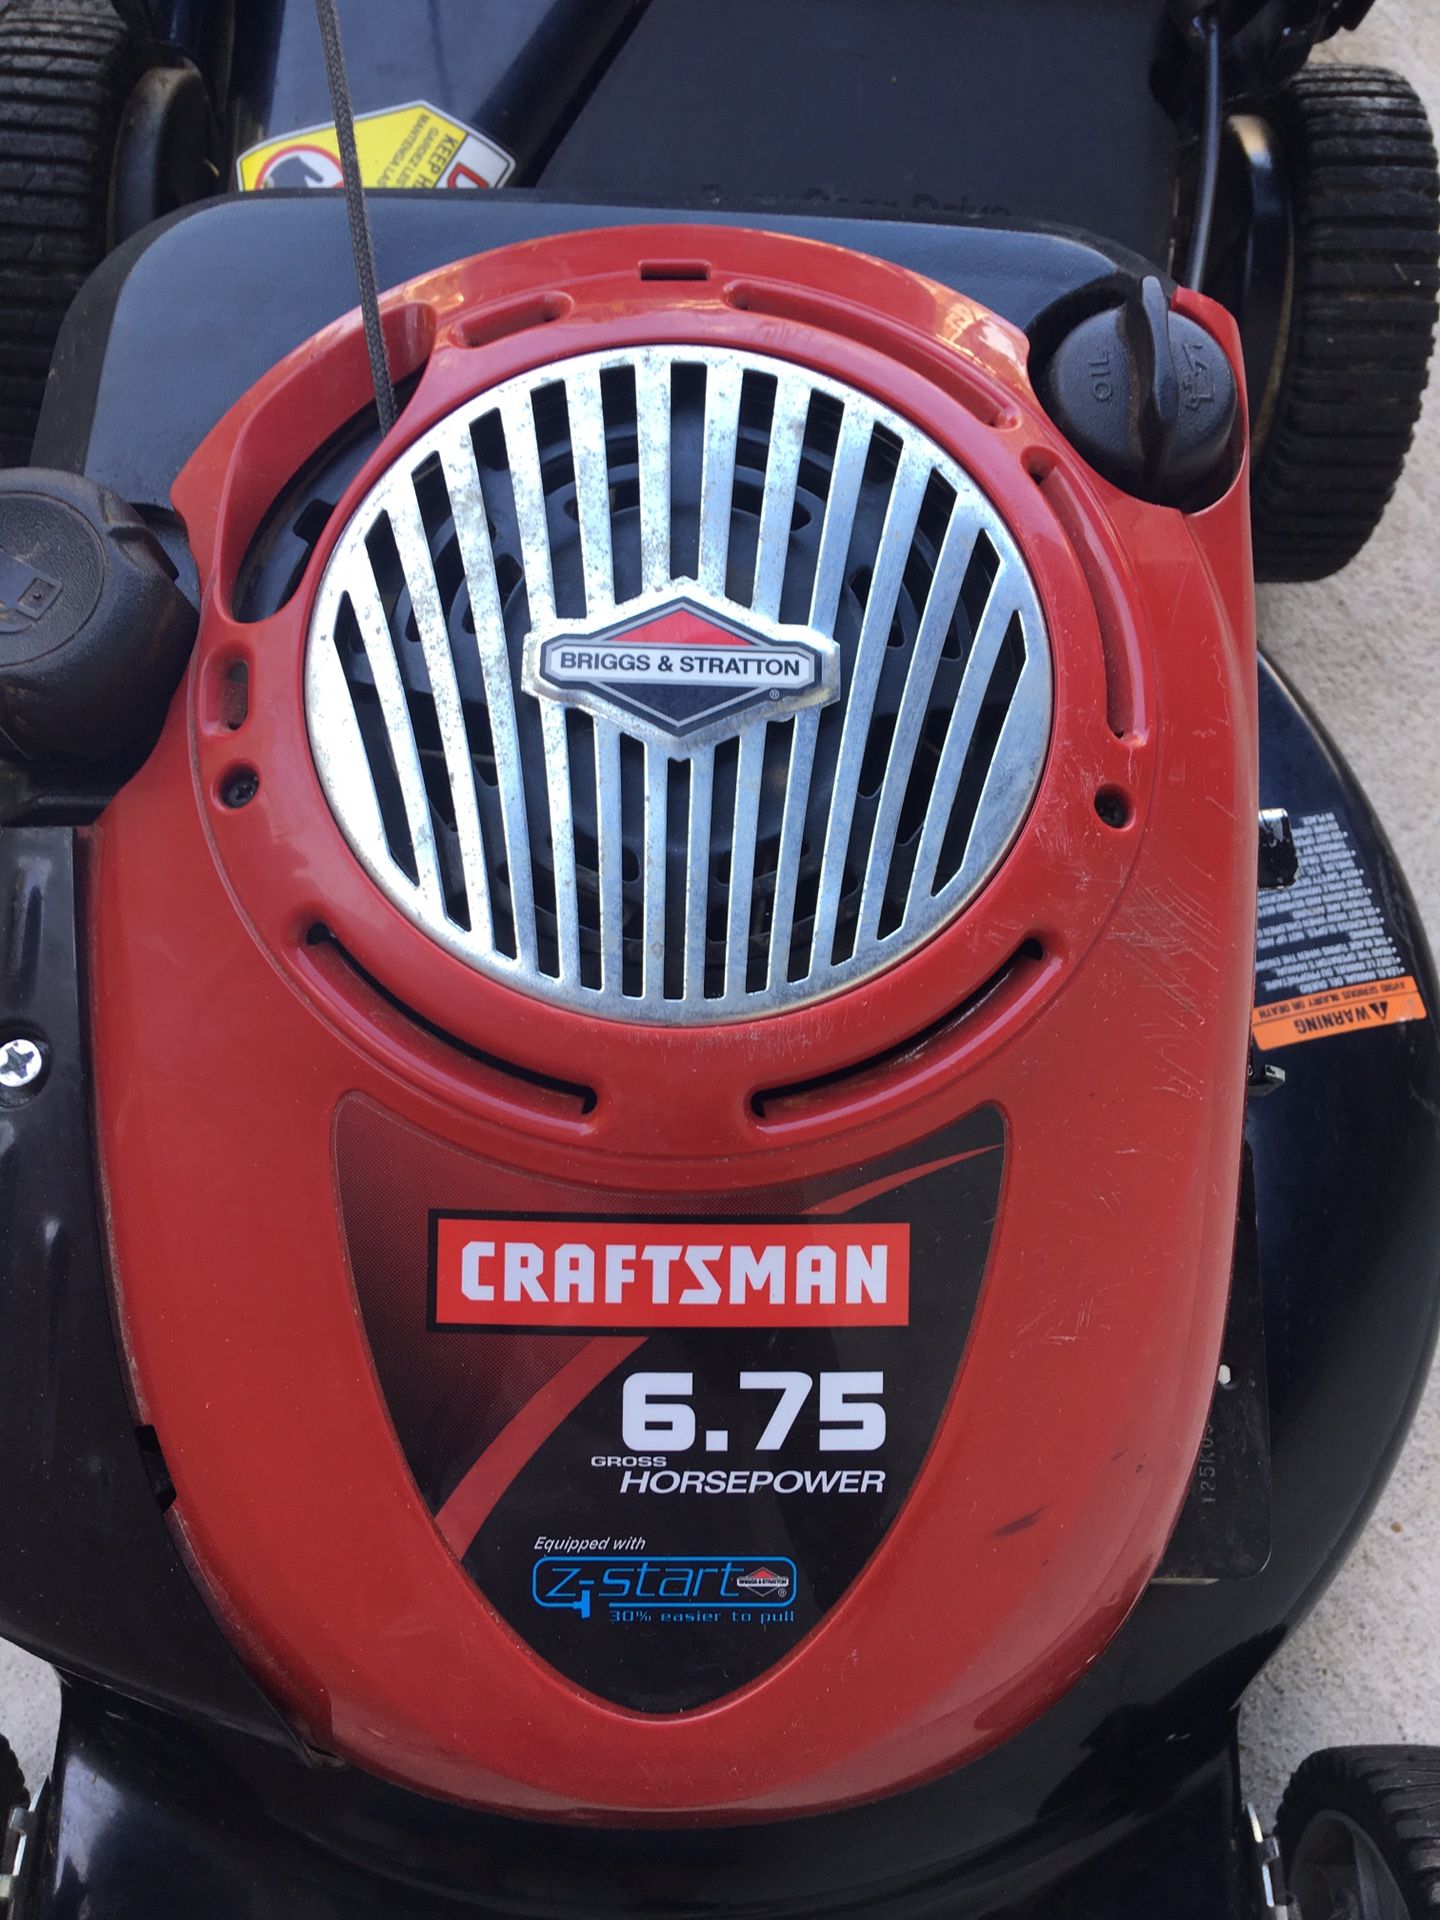 Craftsman self propelled lawn mower with bag